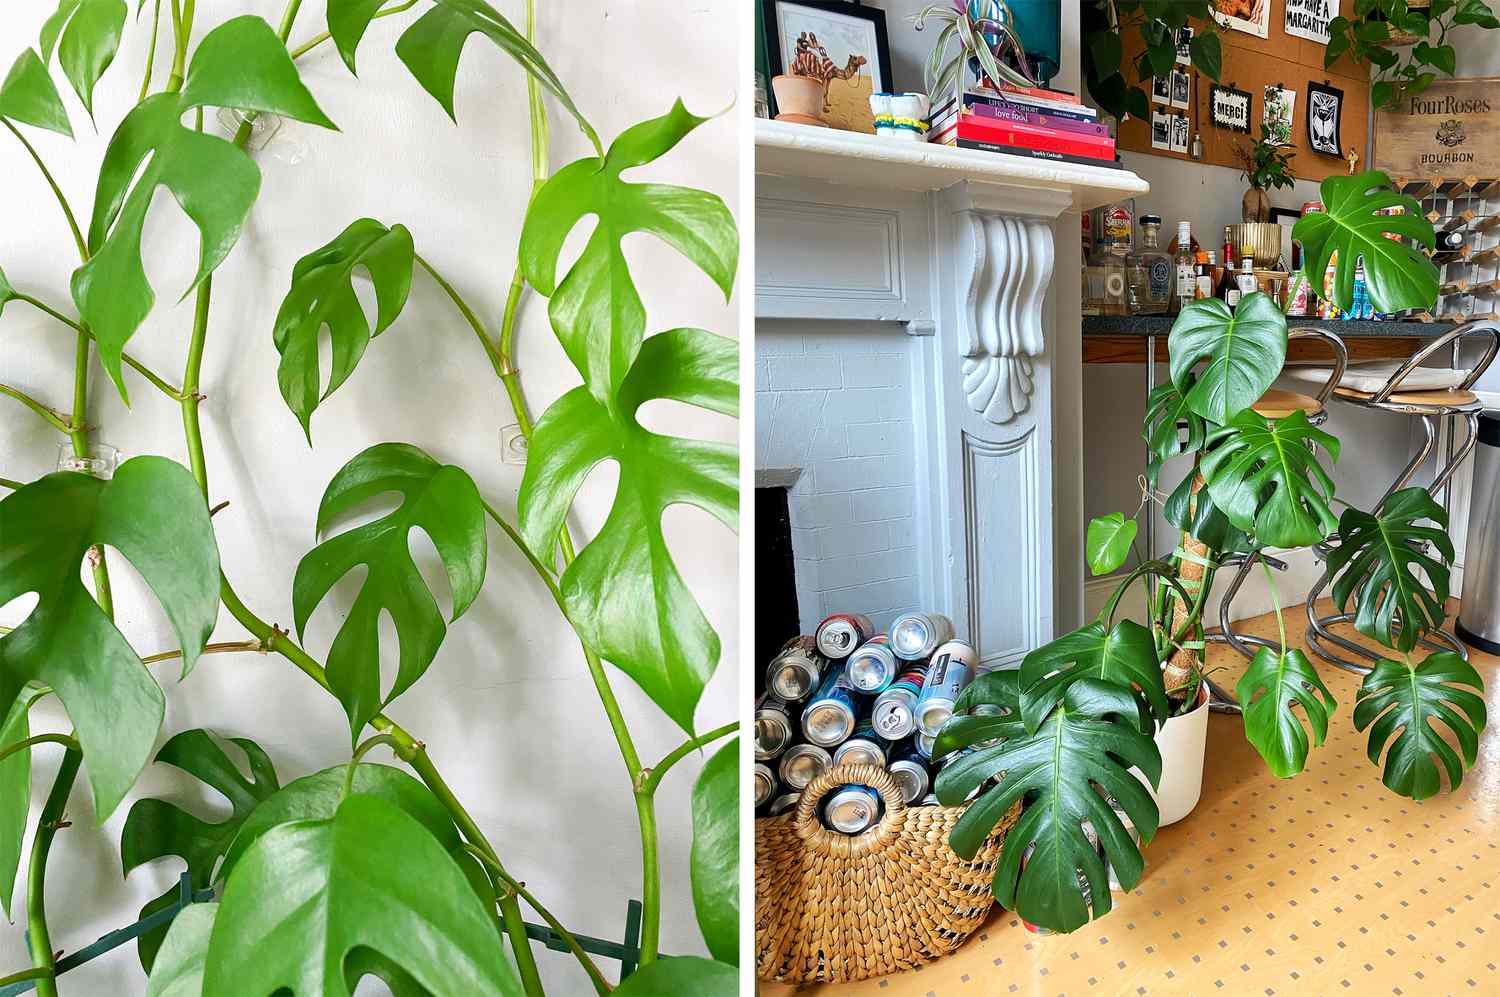 Taylor Fuller's mini monstera (left) climbing a wall and her monstera, right